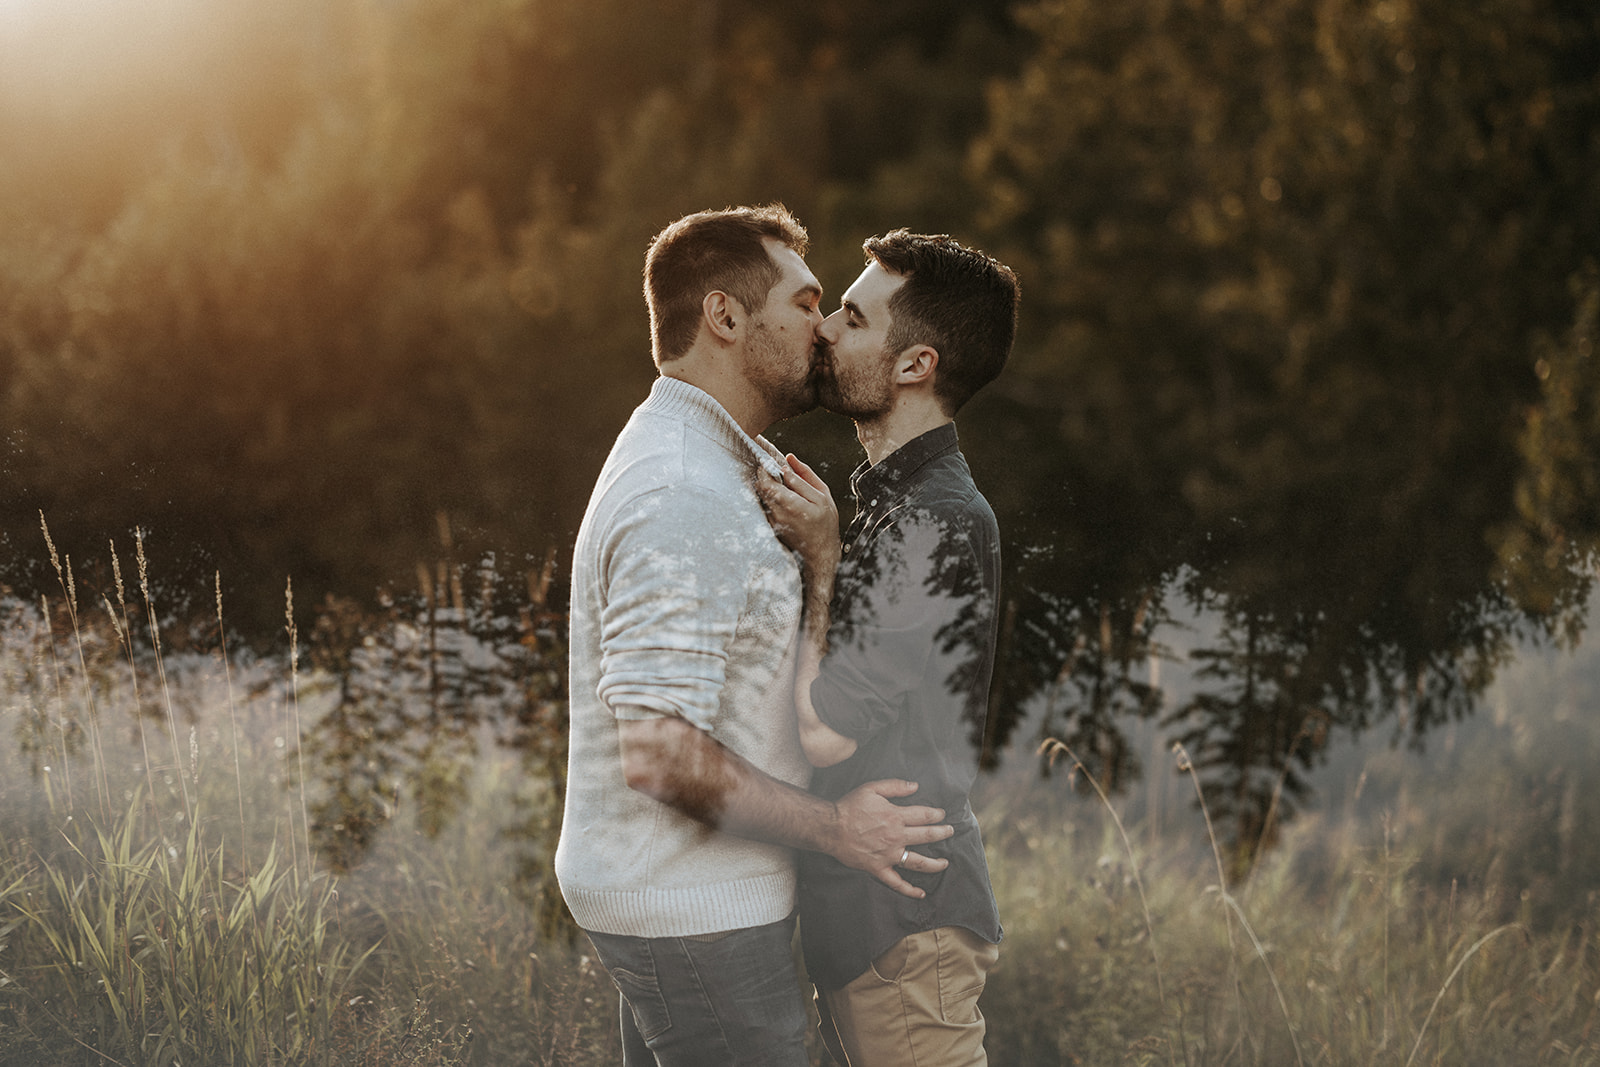 A gay couple kissing in the forest at sunset.